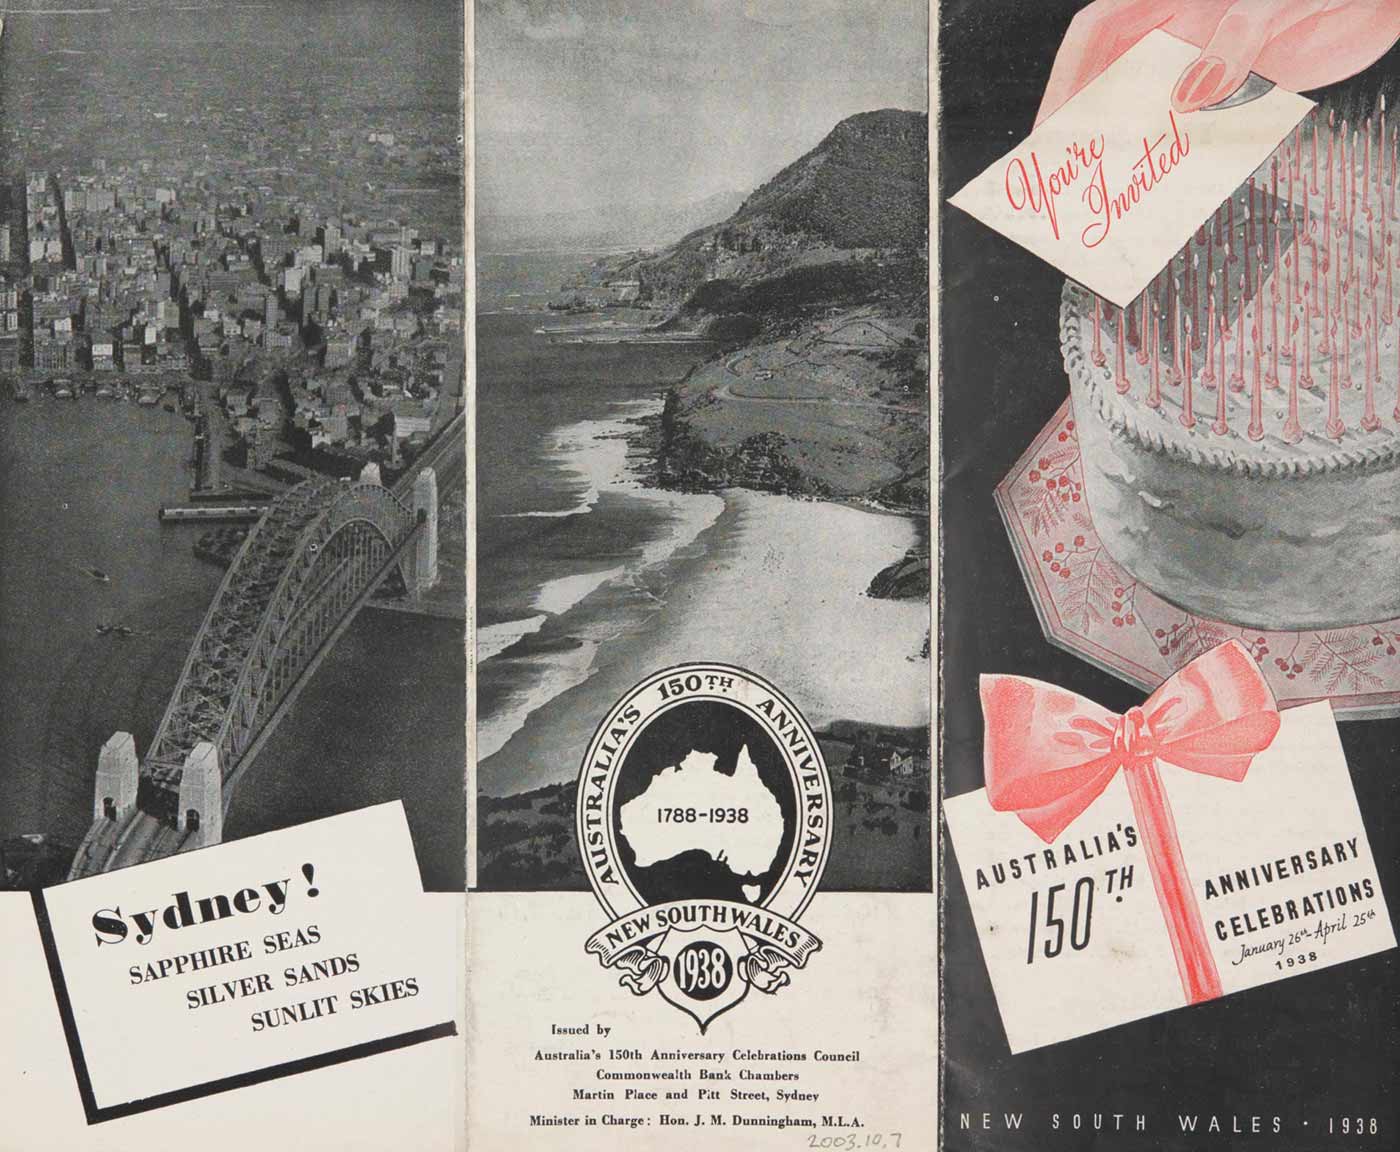 Black, white and pink leaflet with images of a beach, a birthday cake and the Sydney CBD